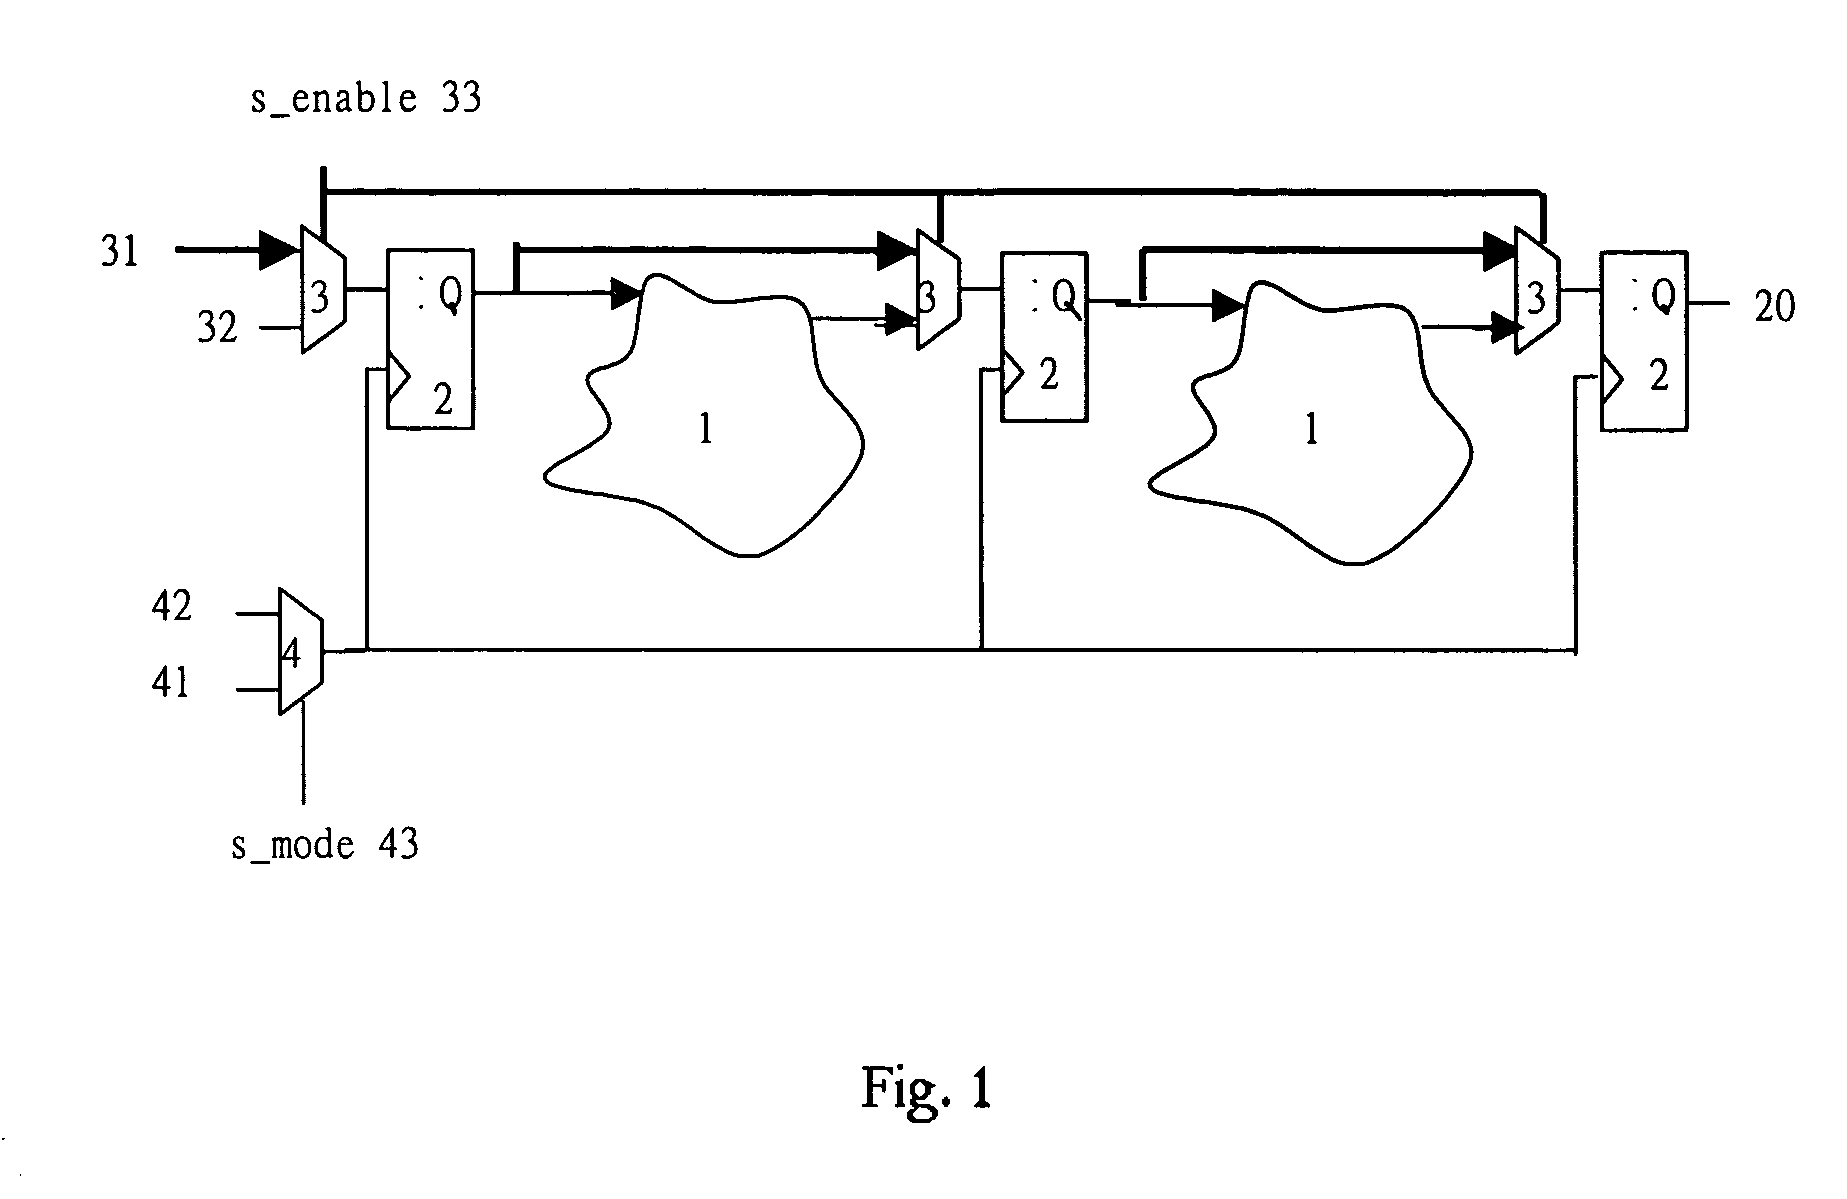 Method of using scan chains and boundary scan for power saving